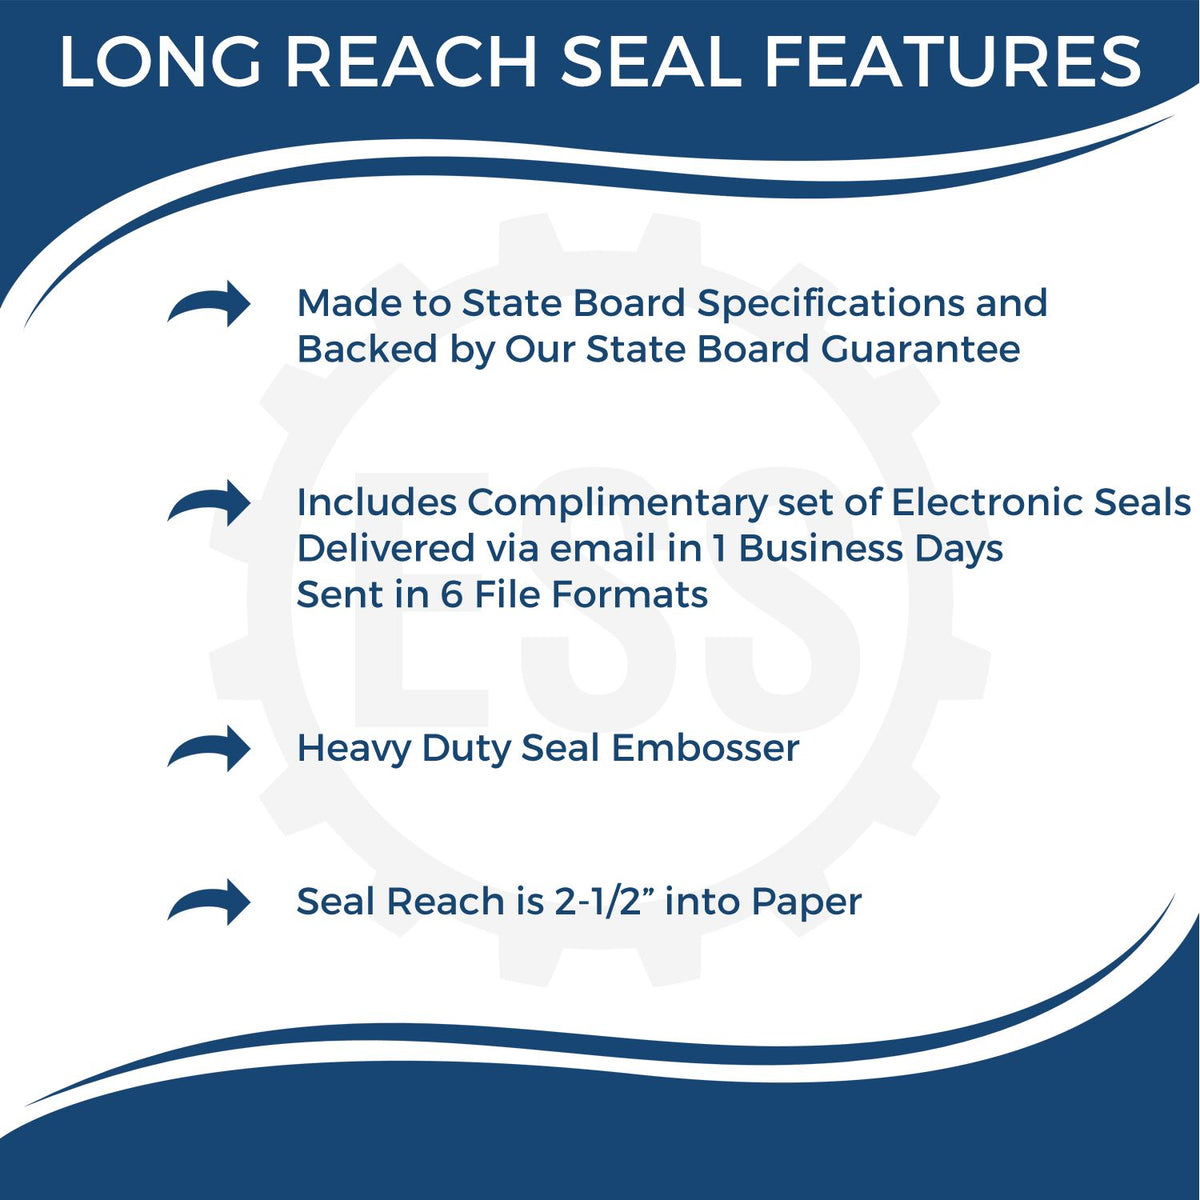 A picture of an infographic highlighting the selling points for the Long Reach Wyoming PE Seal